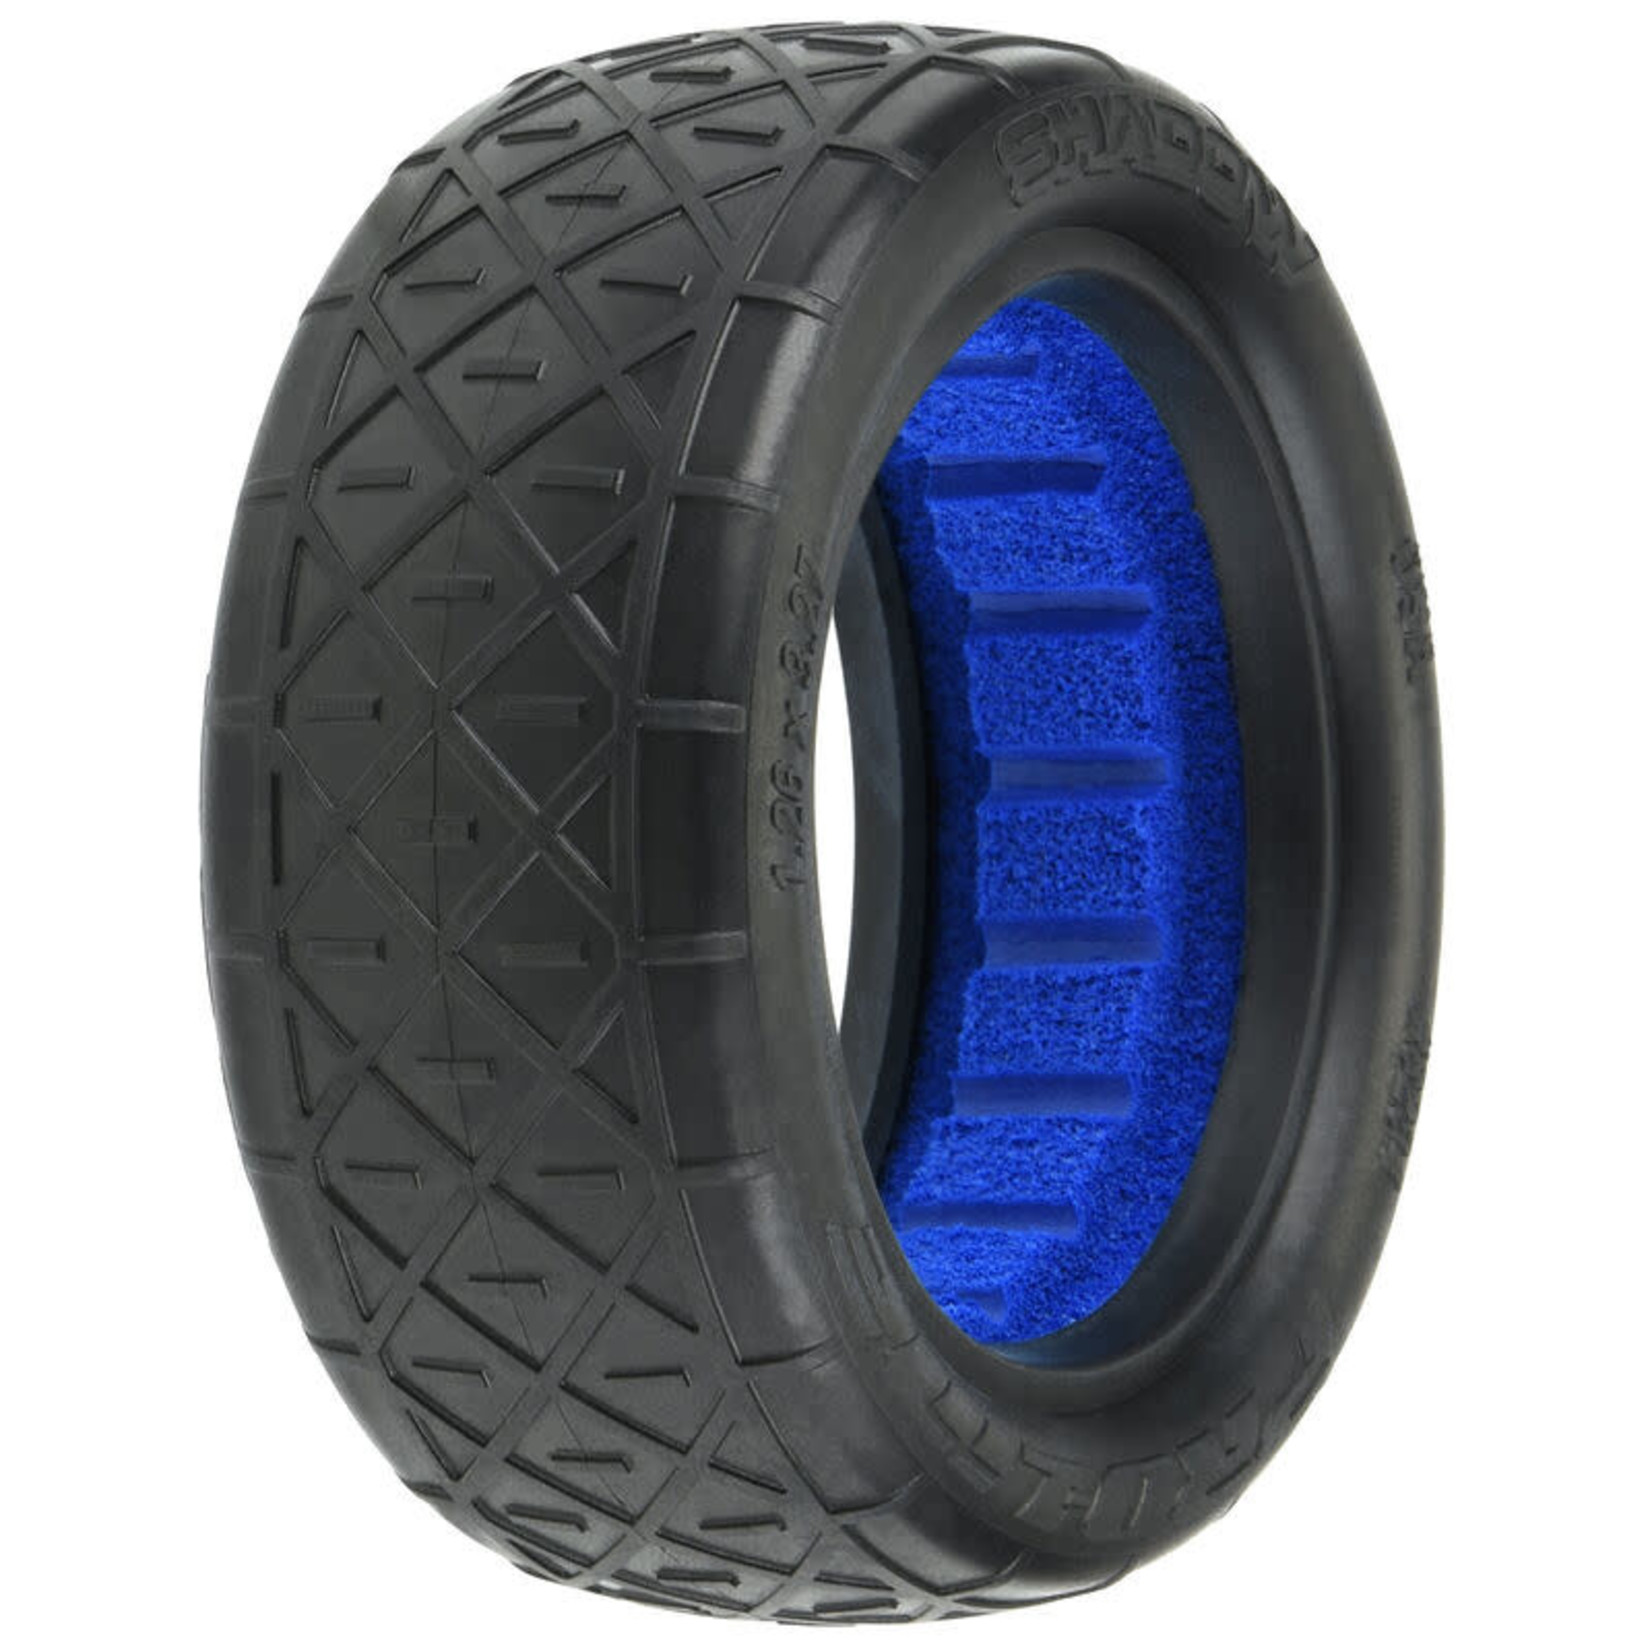 Pro-line Racing PRO8294203 Pro-Line 1/10 Shadow S3 4WD Front 2.2" Off-Road Buggy Tires (2)